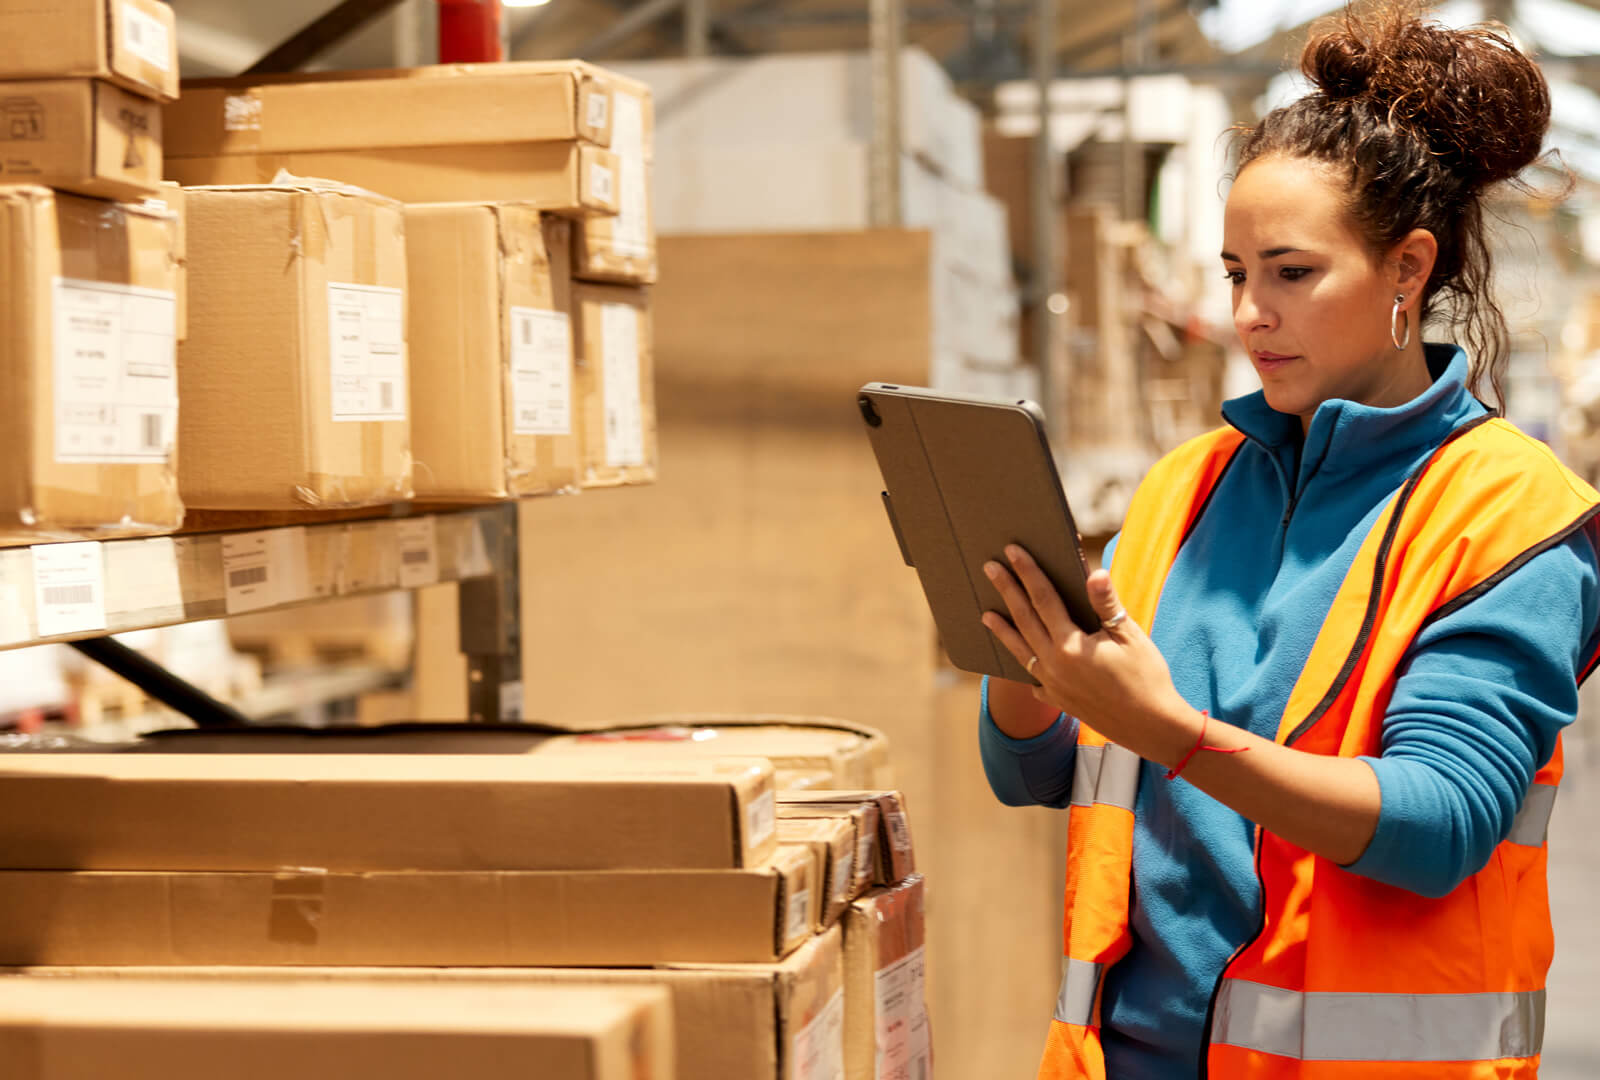 Woman in a warehouse wearing a orange reflective vest interacting with a tablet device.